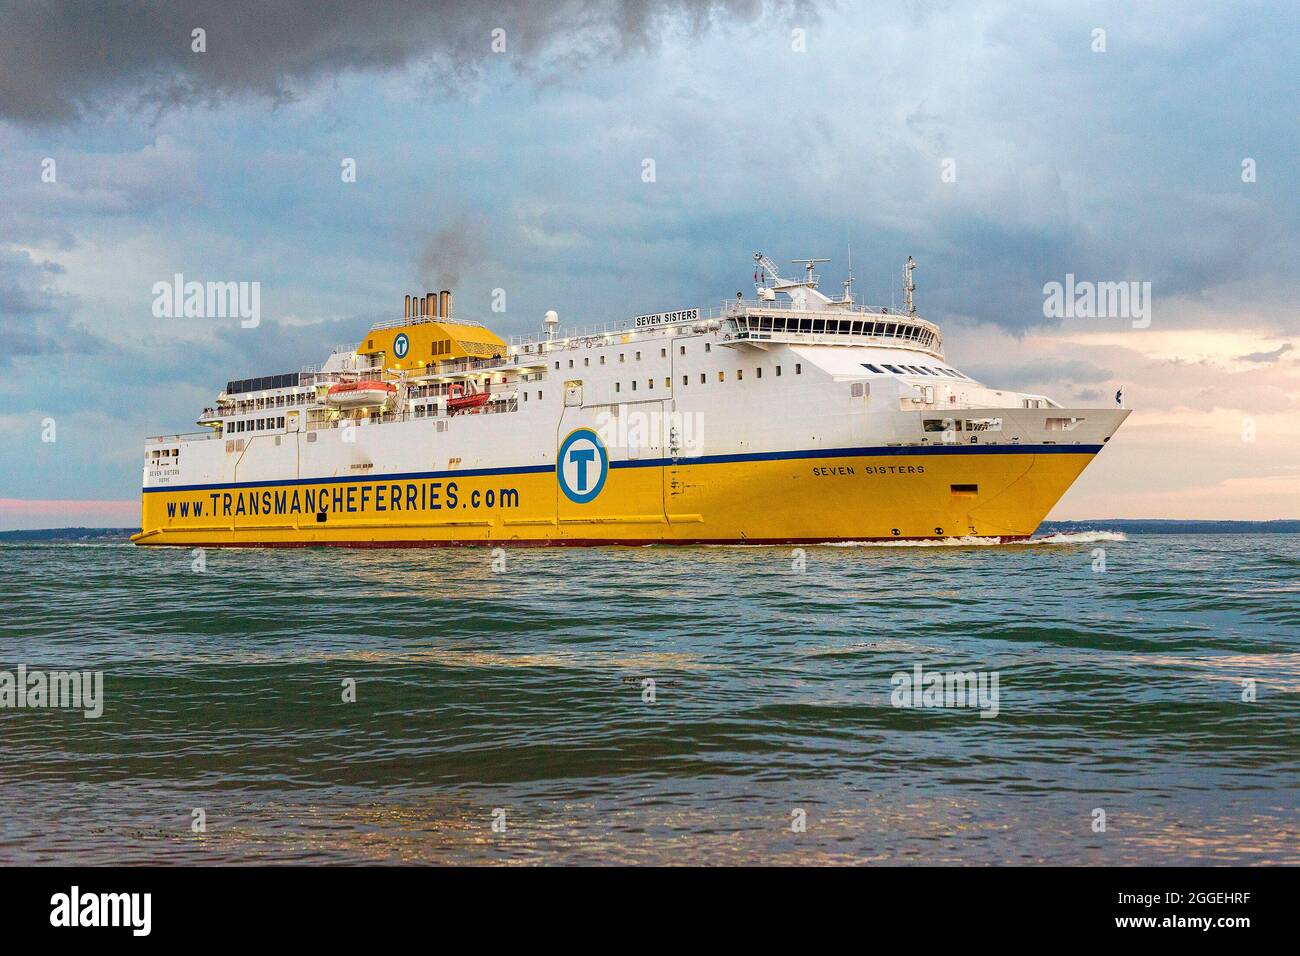 Seven Sisters is a passenger ferry operated by DFDS on the cross ...